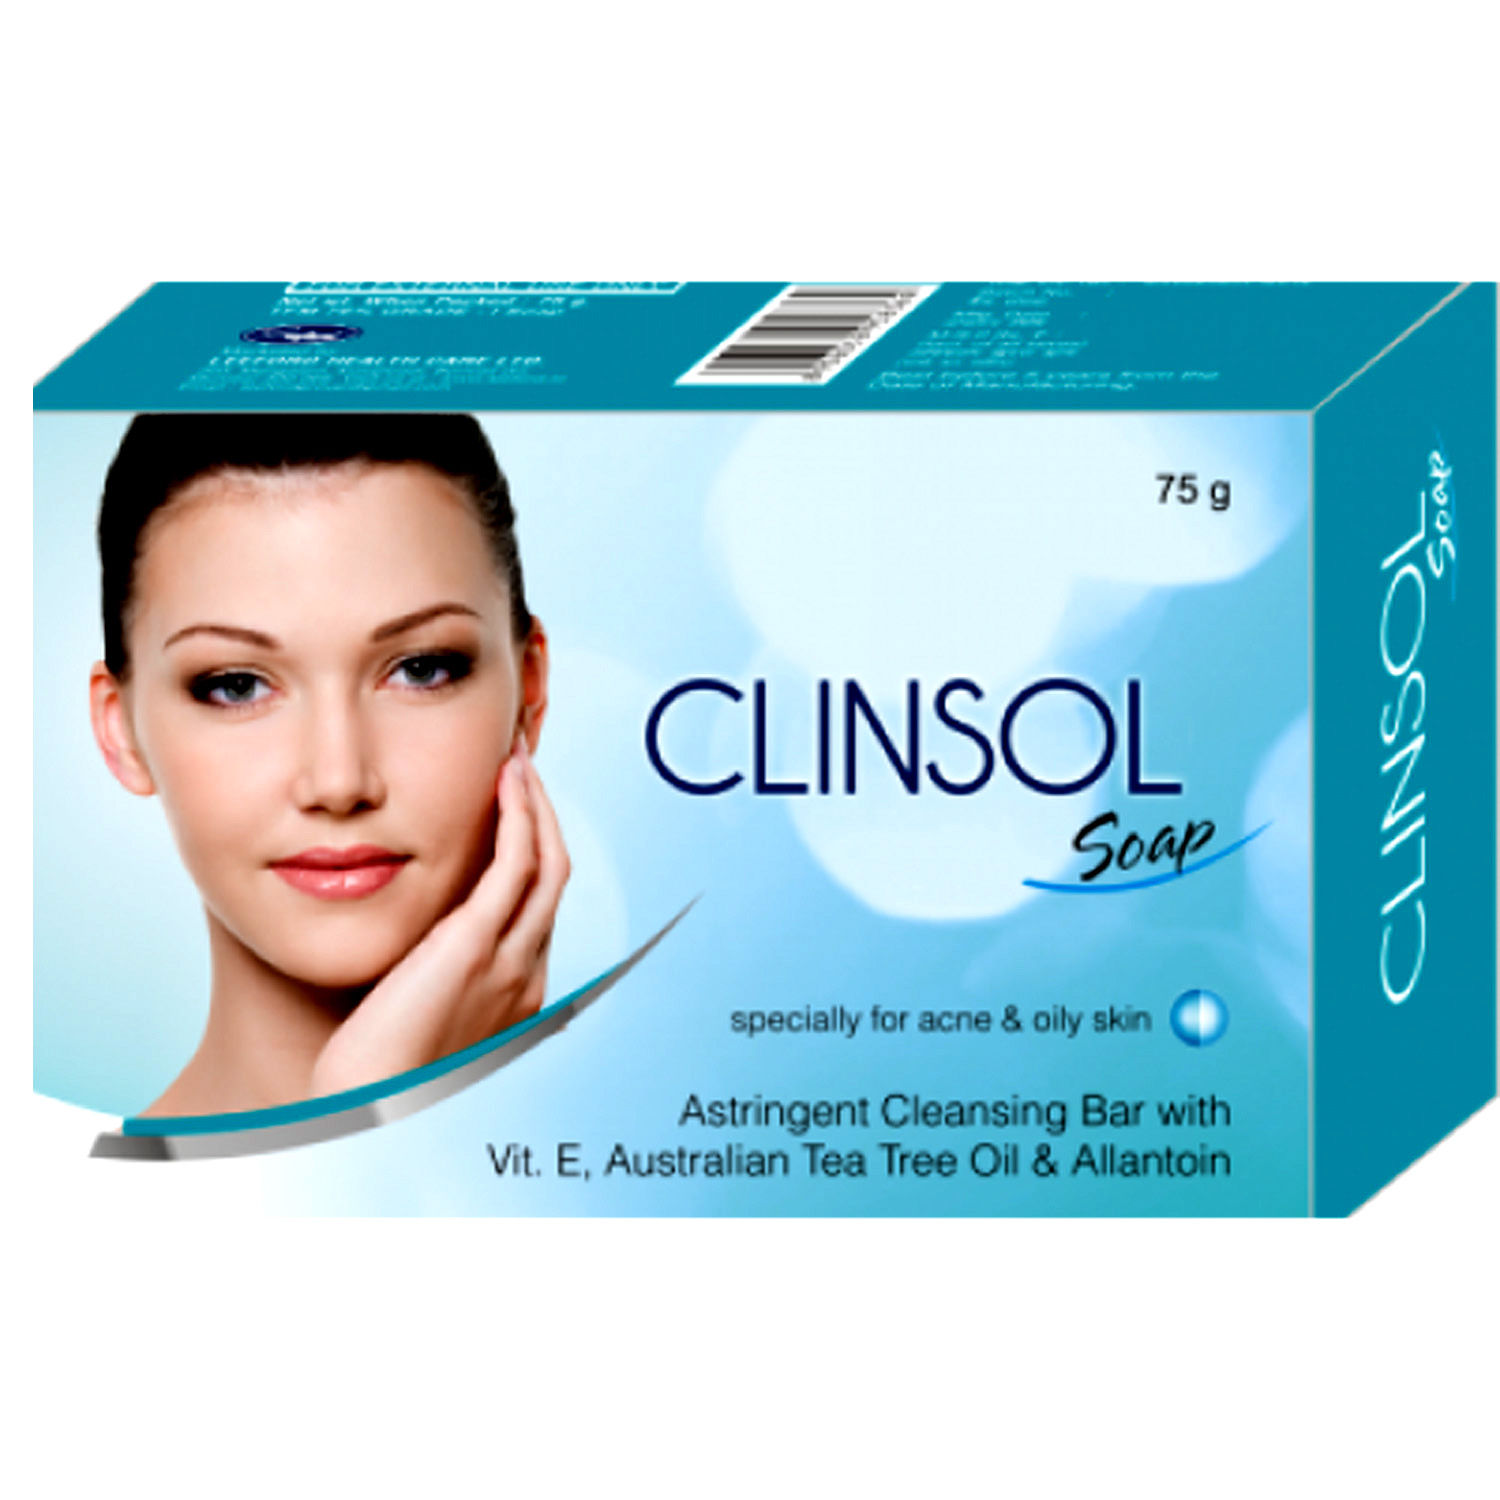 Buy Clinsol Soap, 75 gm Online